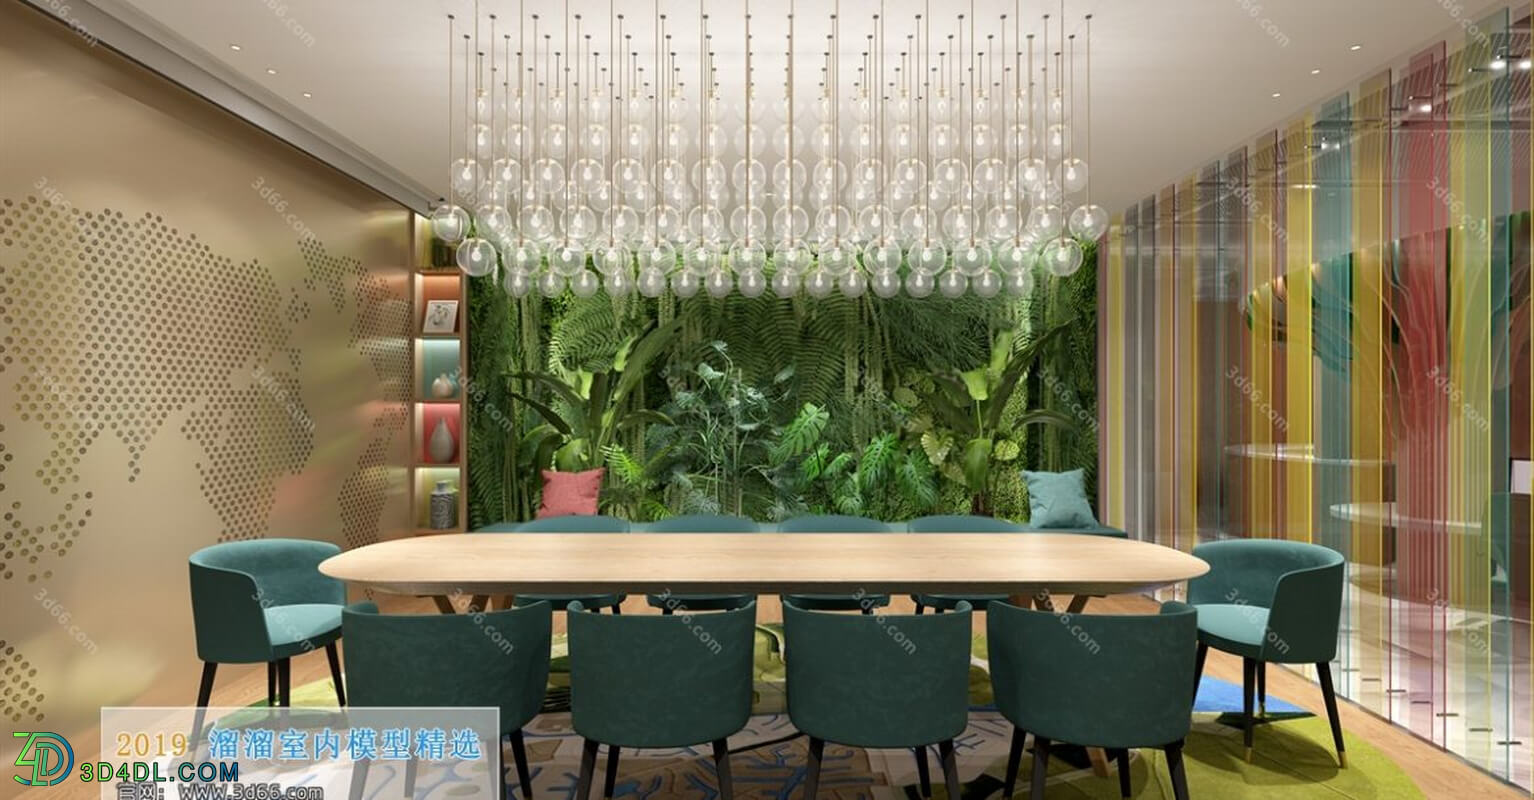 3D66 2019 Office & Meeting & Reception Room (002)